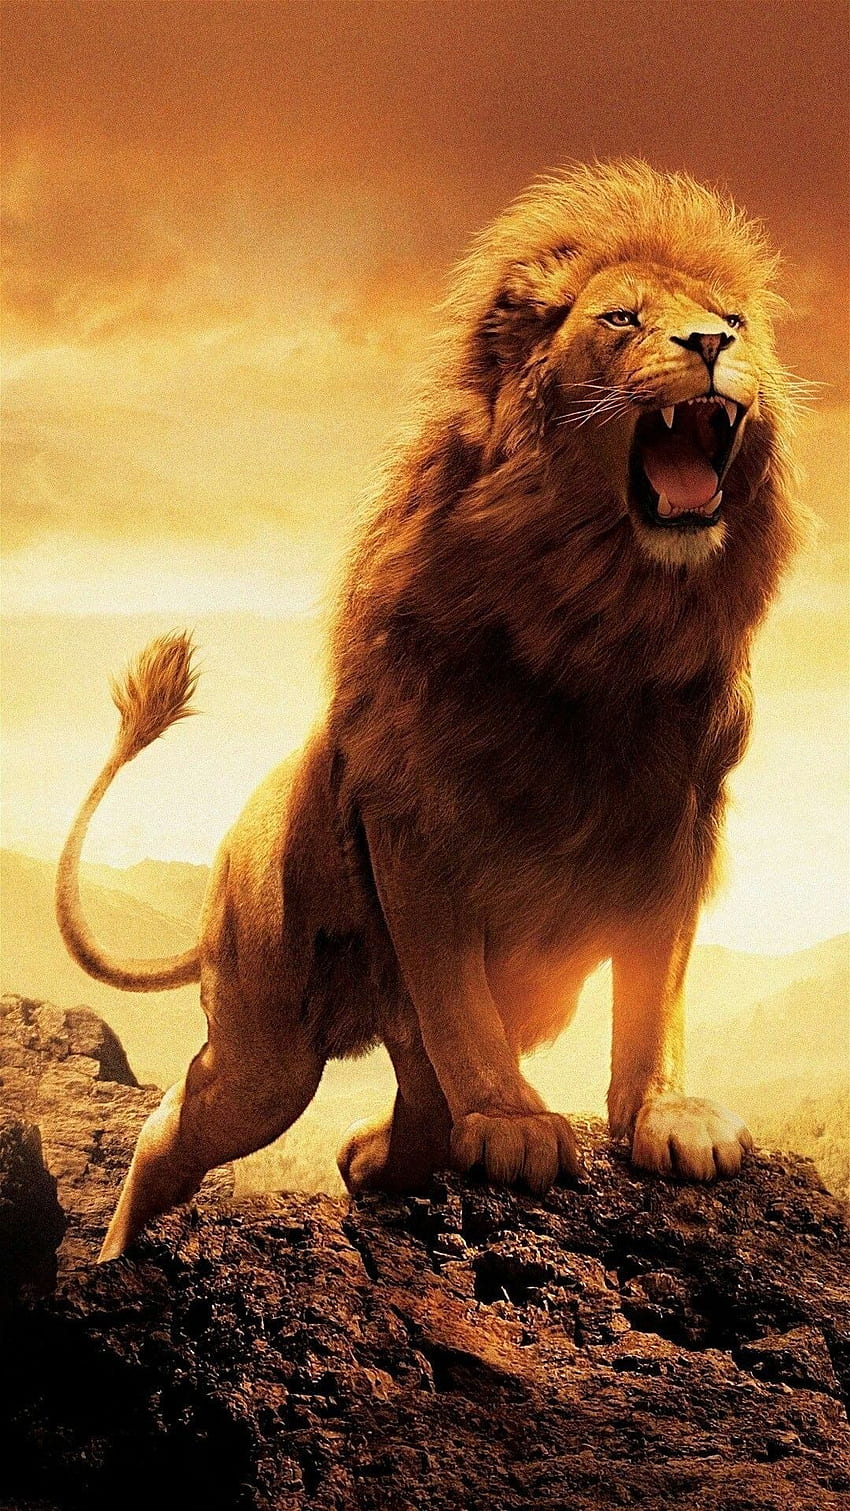 Idris Elba punches a lion in Beast movie: Would that work? Zoologists weigh  in.